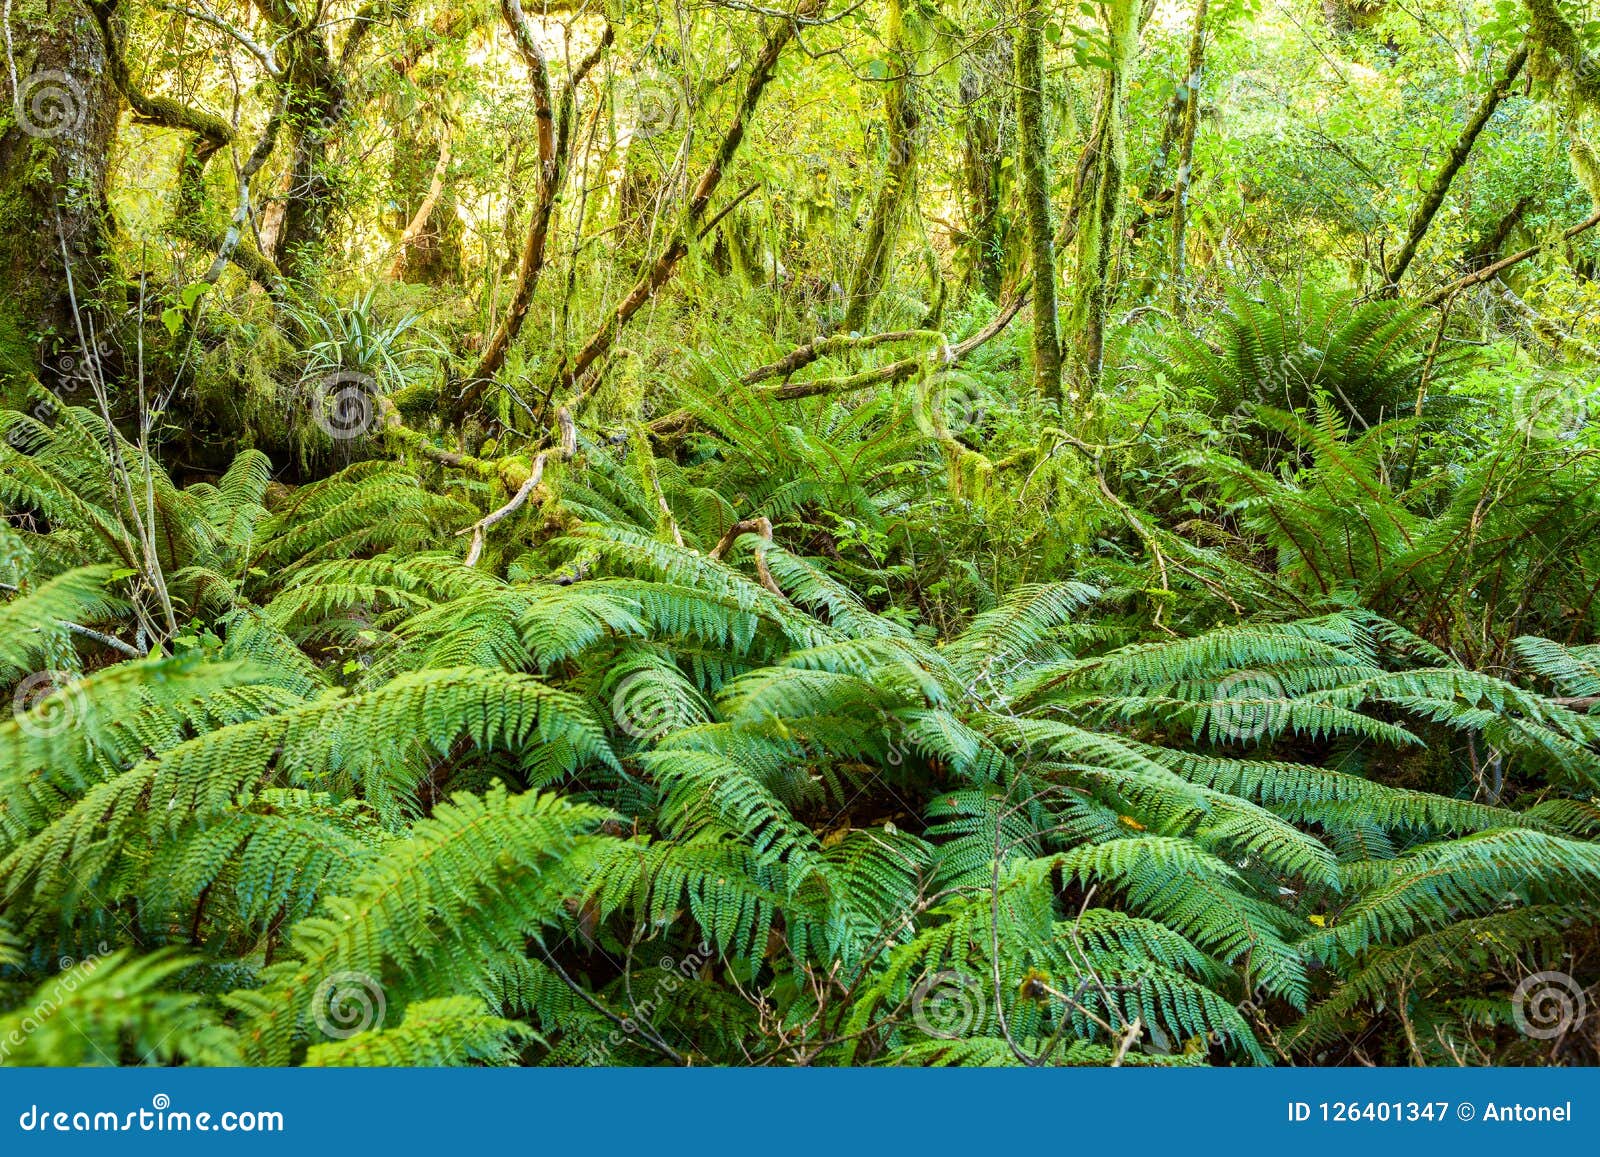 dense thicket in the temperate rainforest, south island, new zealand